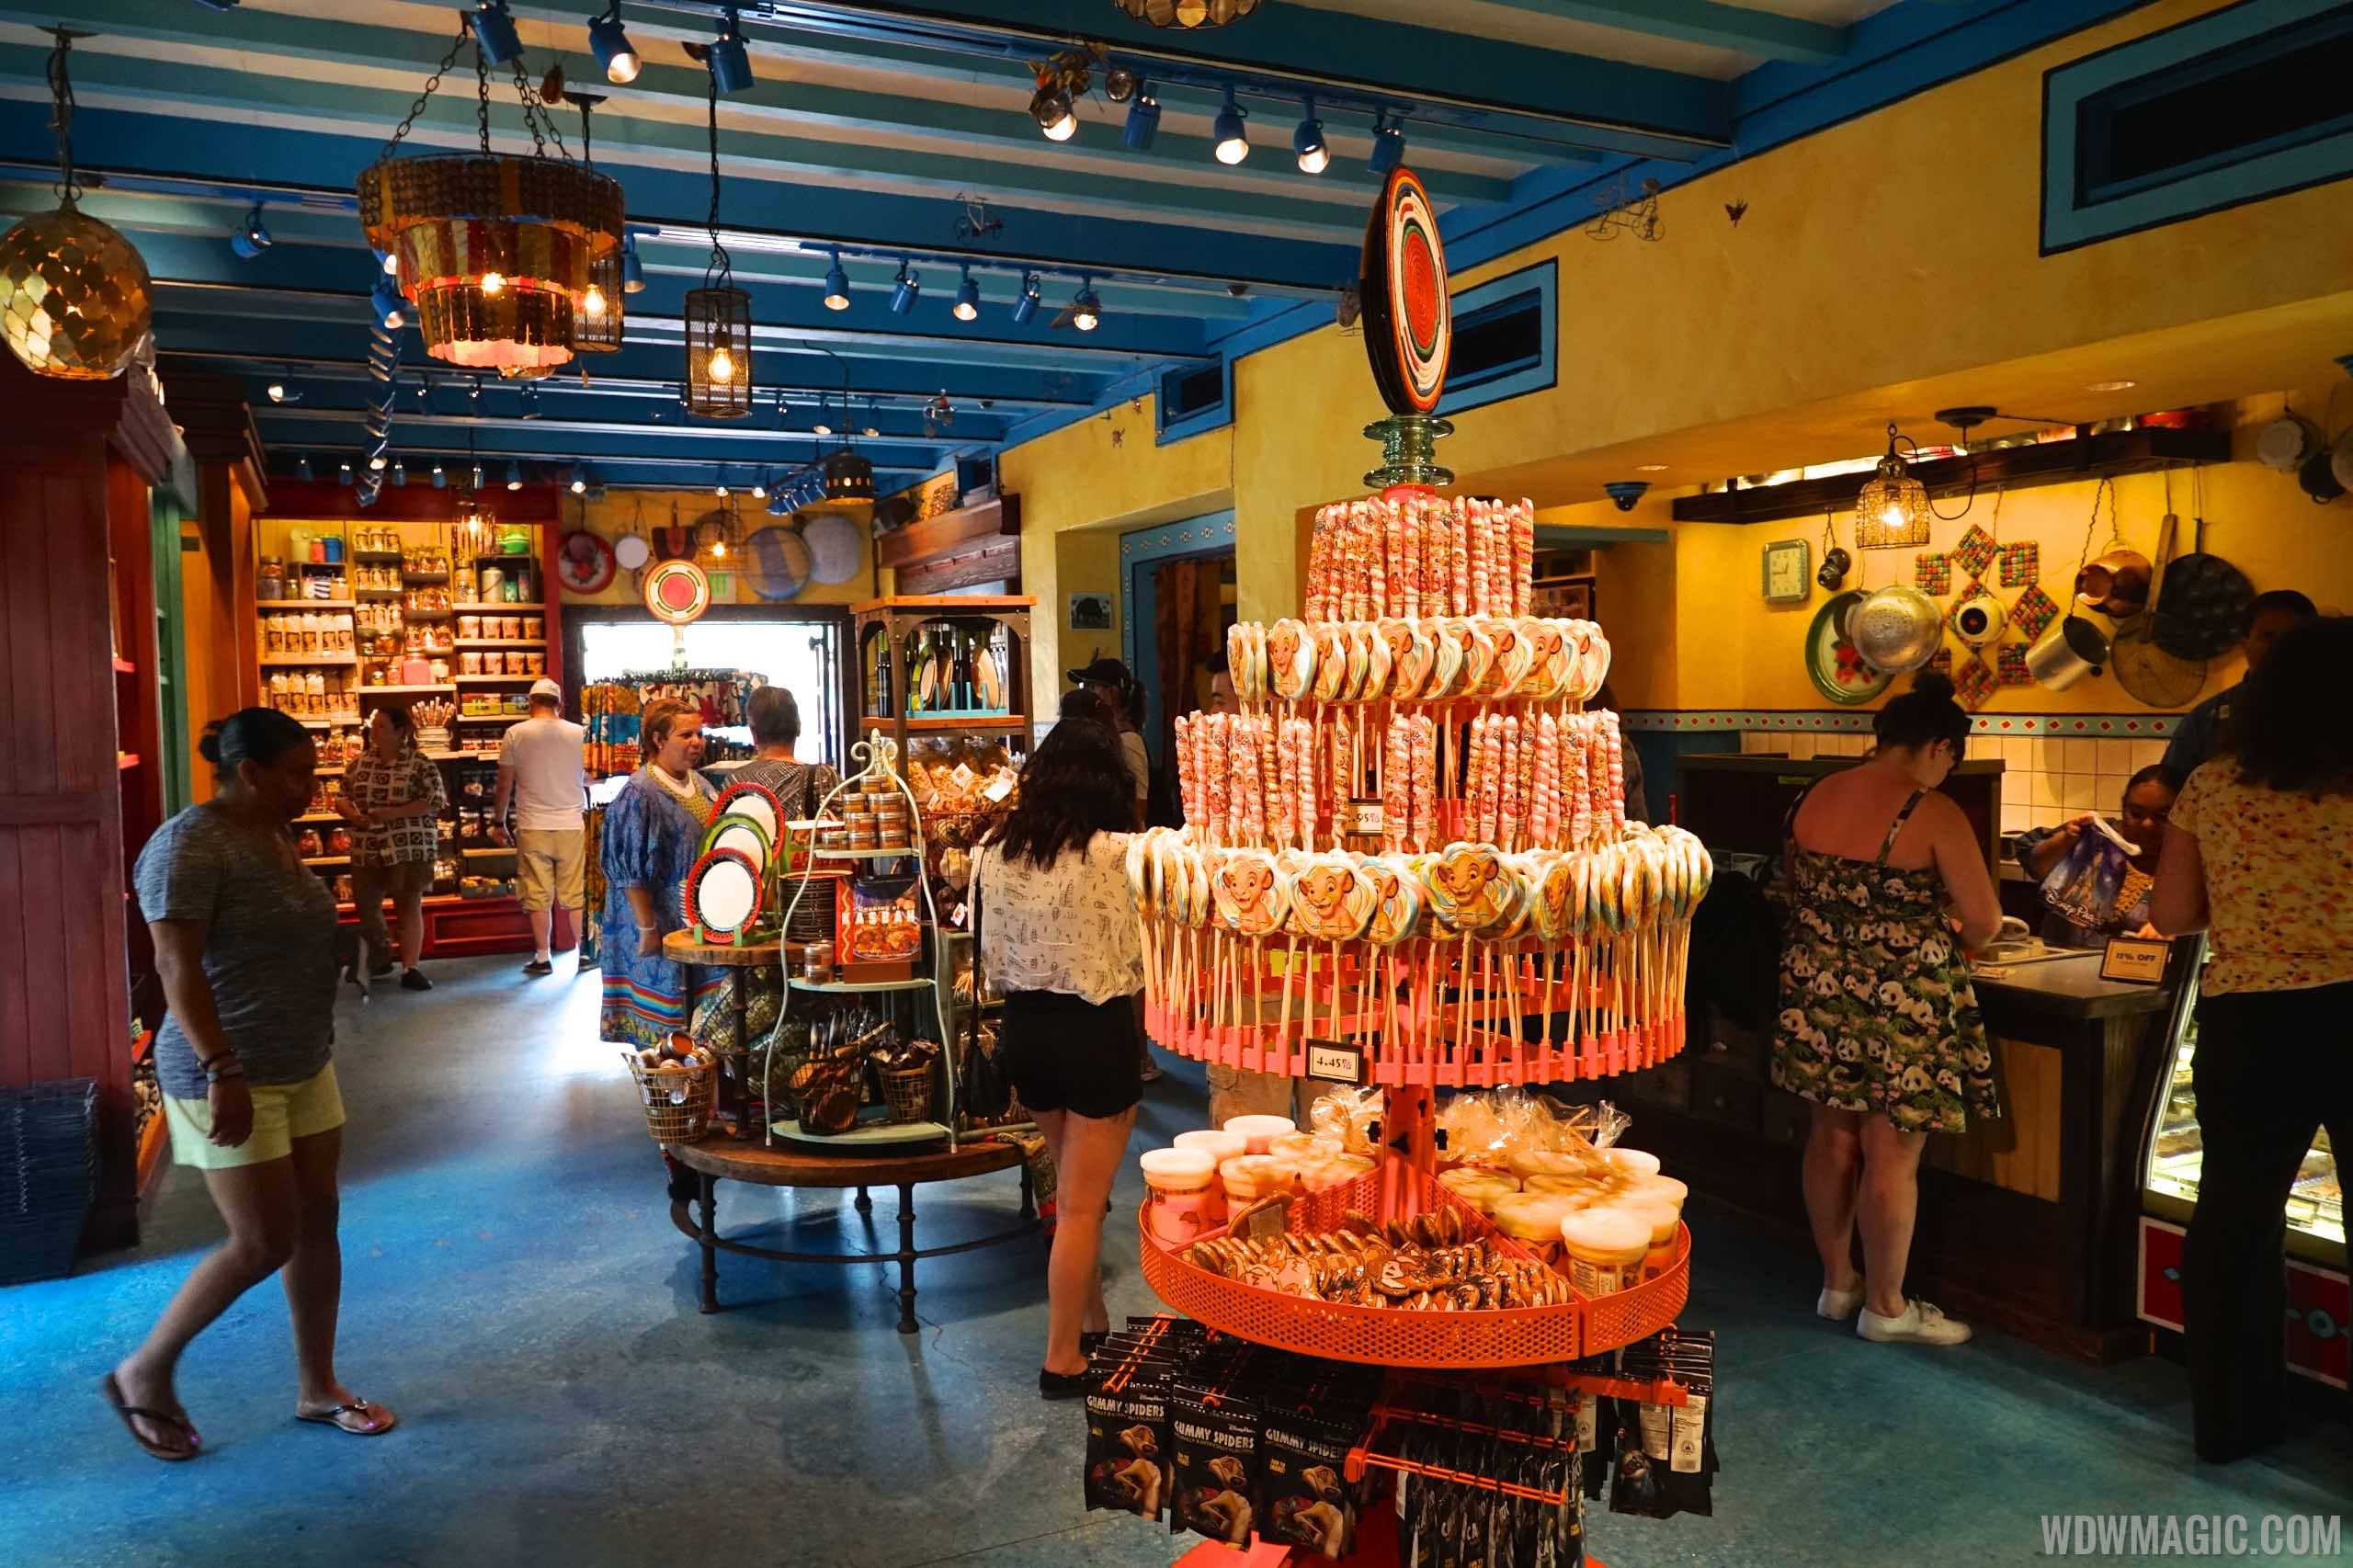 Zuri's Sweets Shop overview